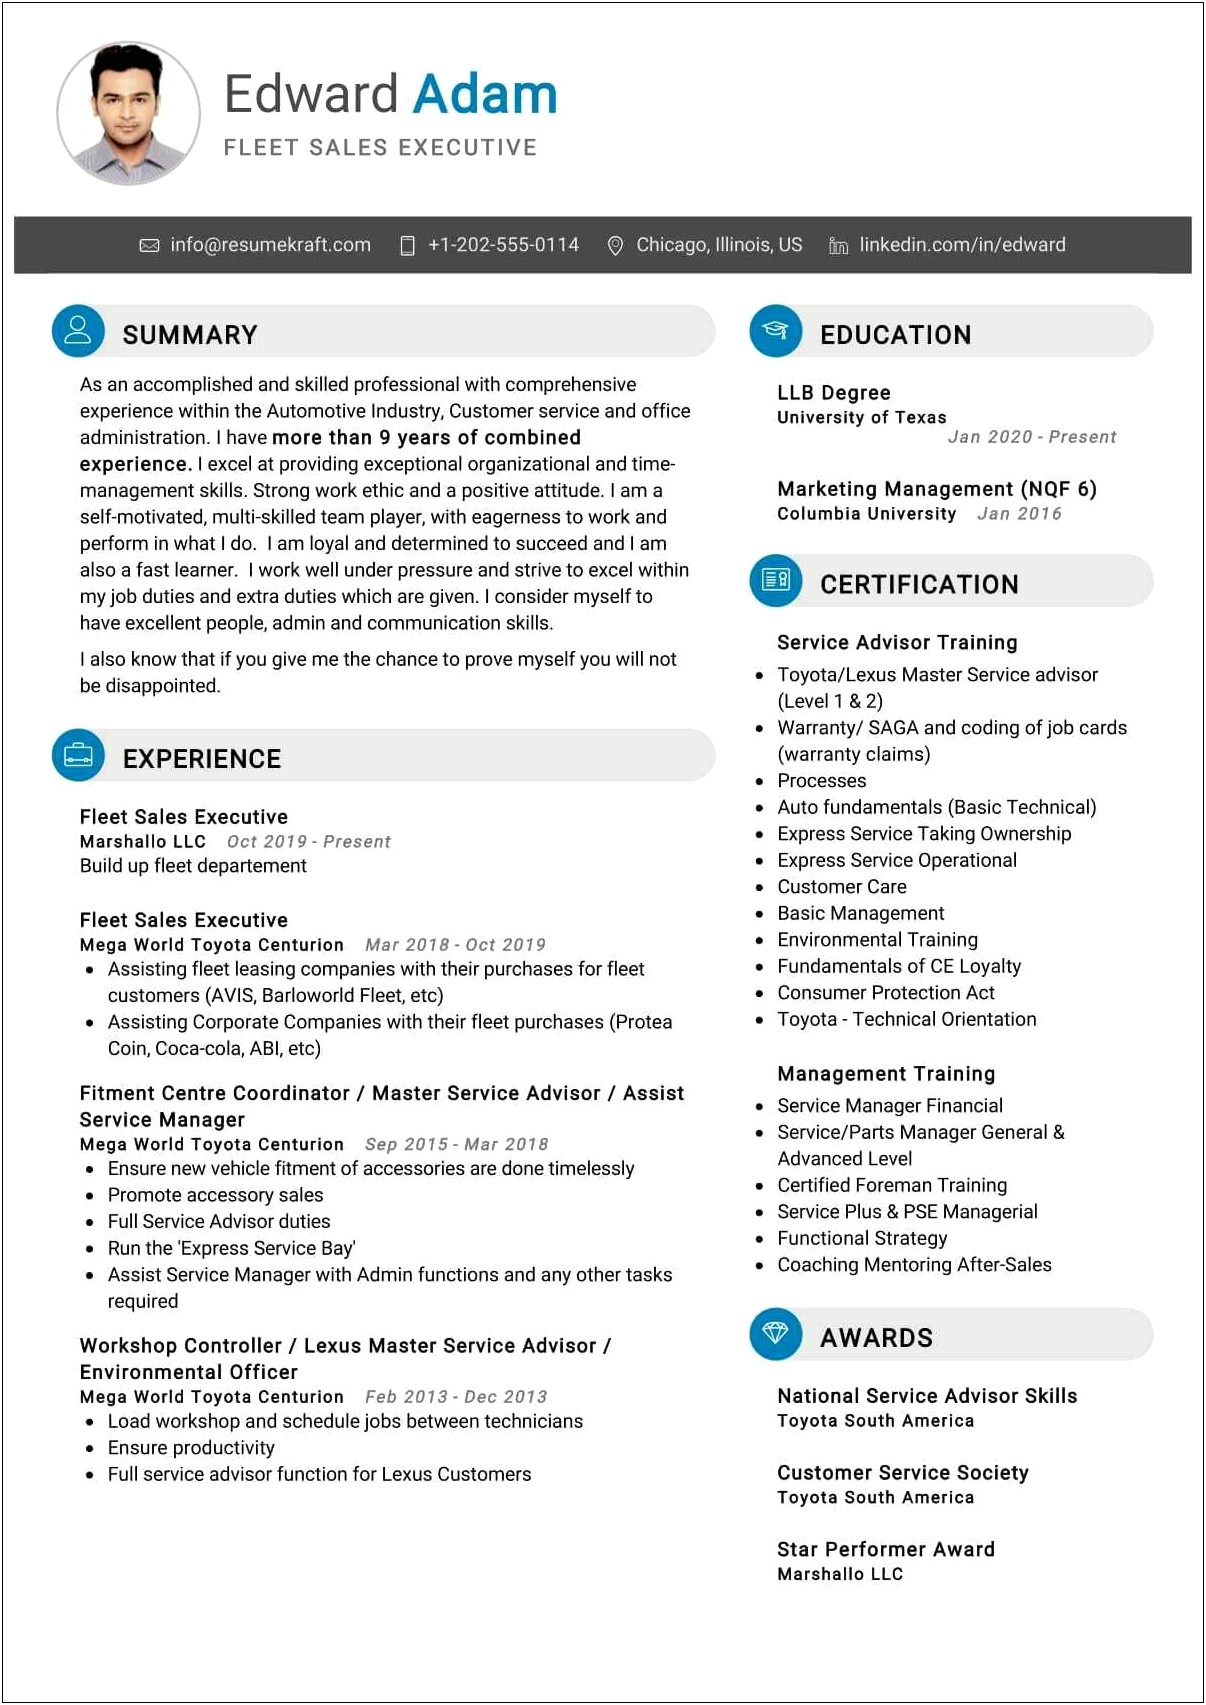 Resume Examples Coca Cola Account Manager